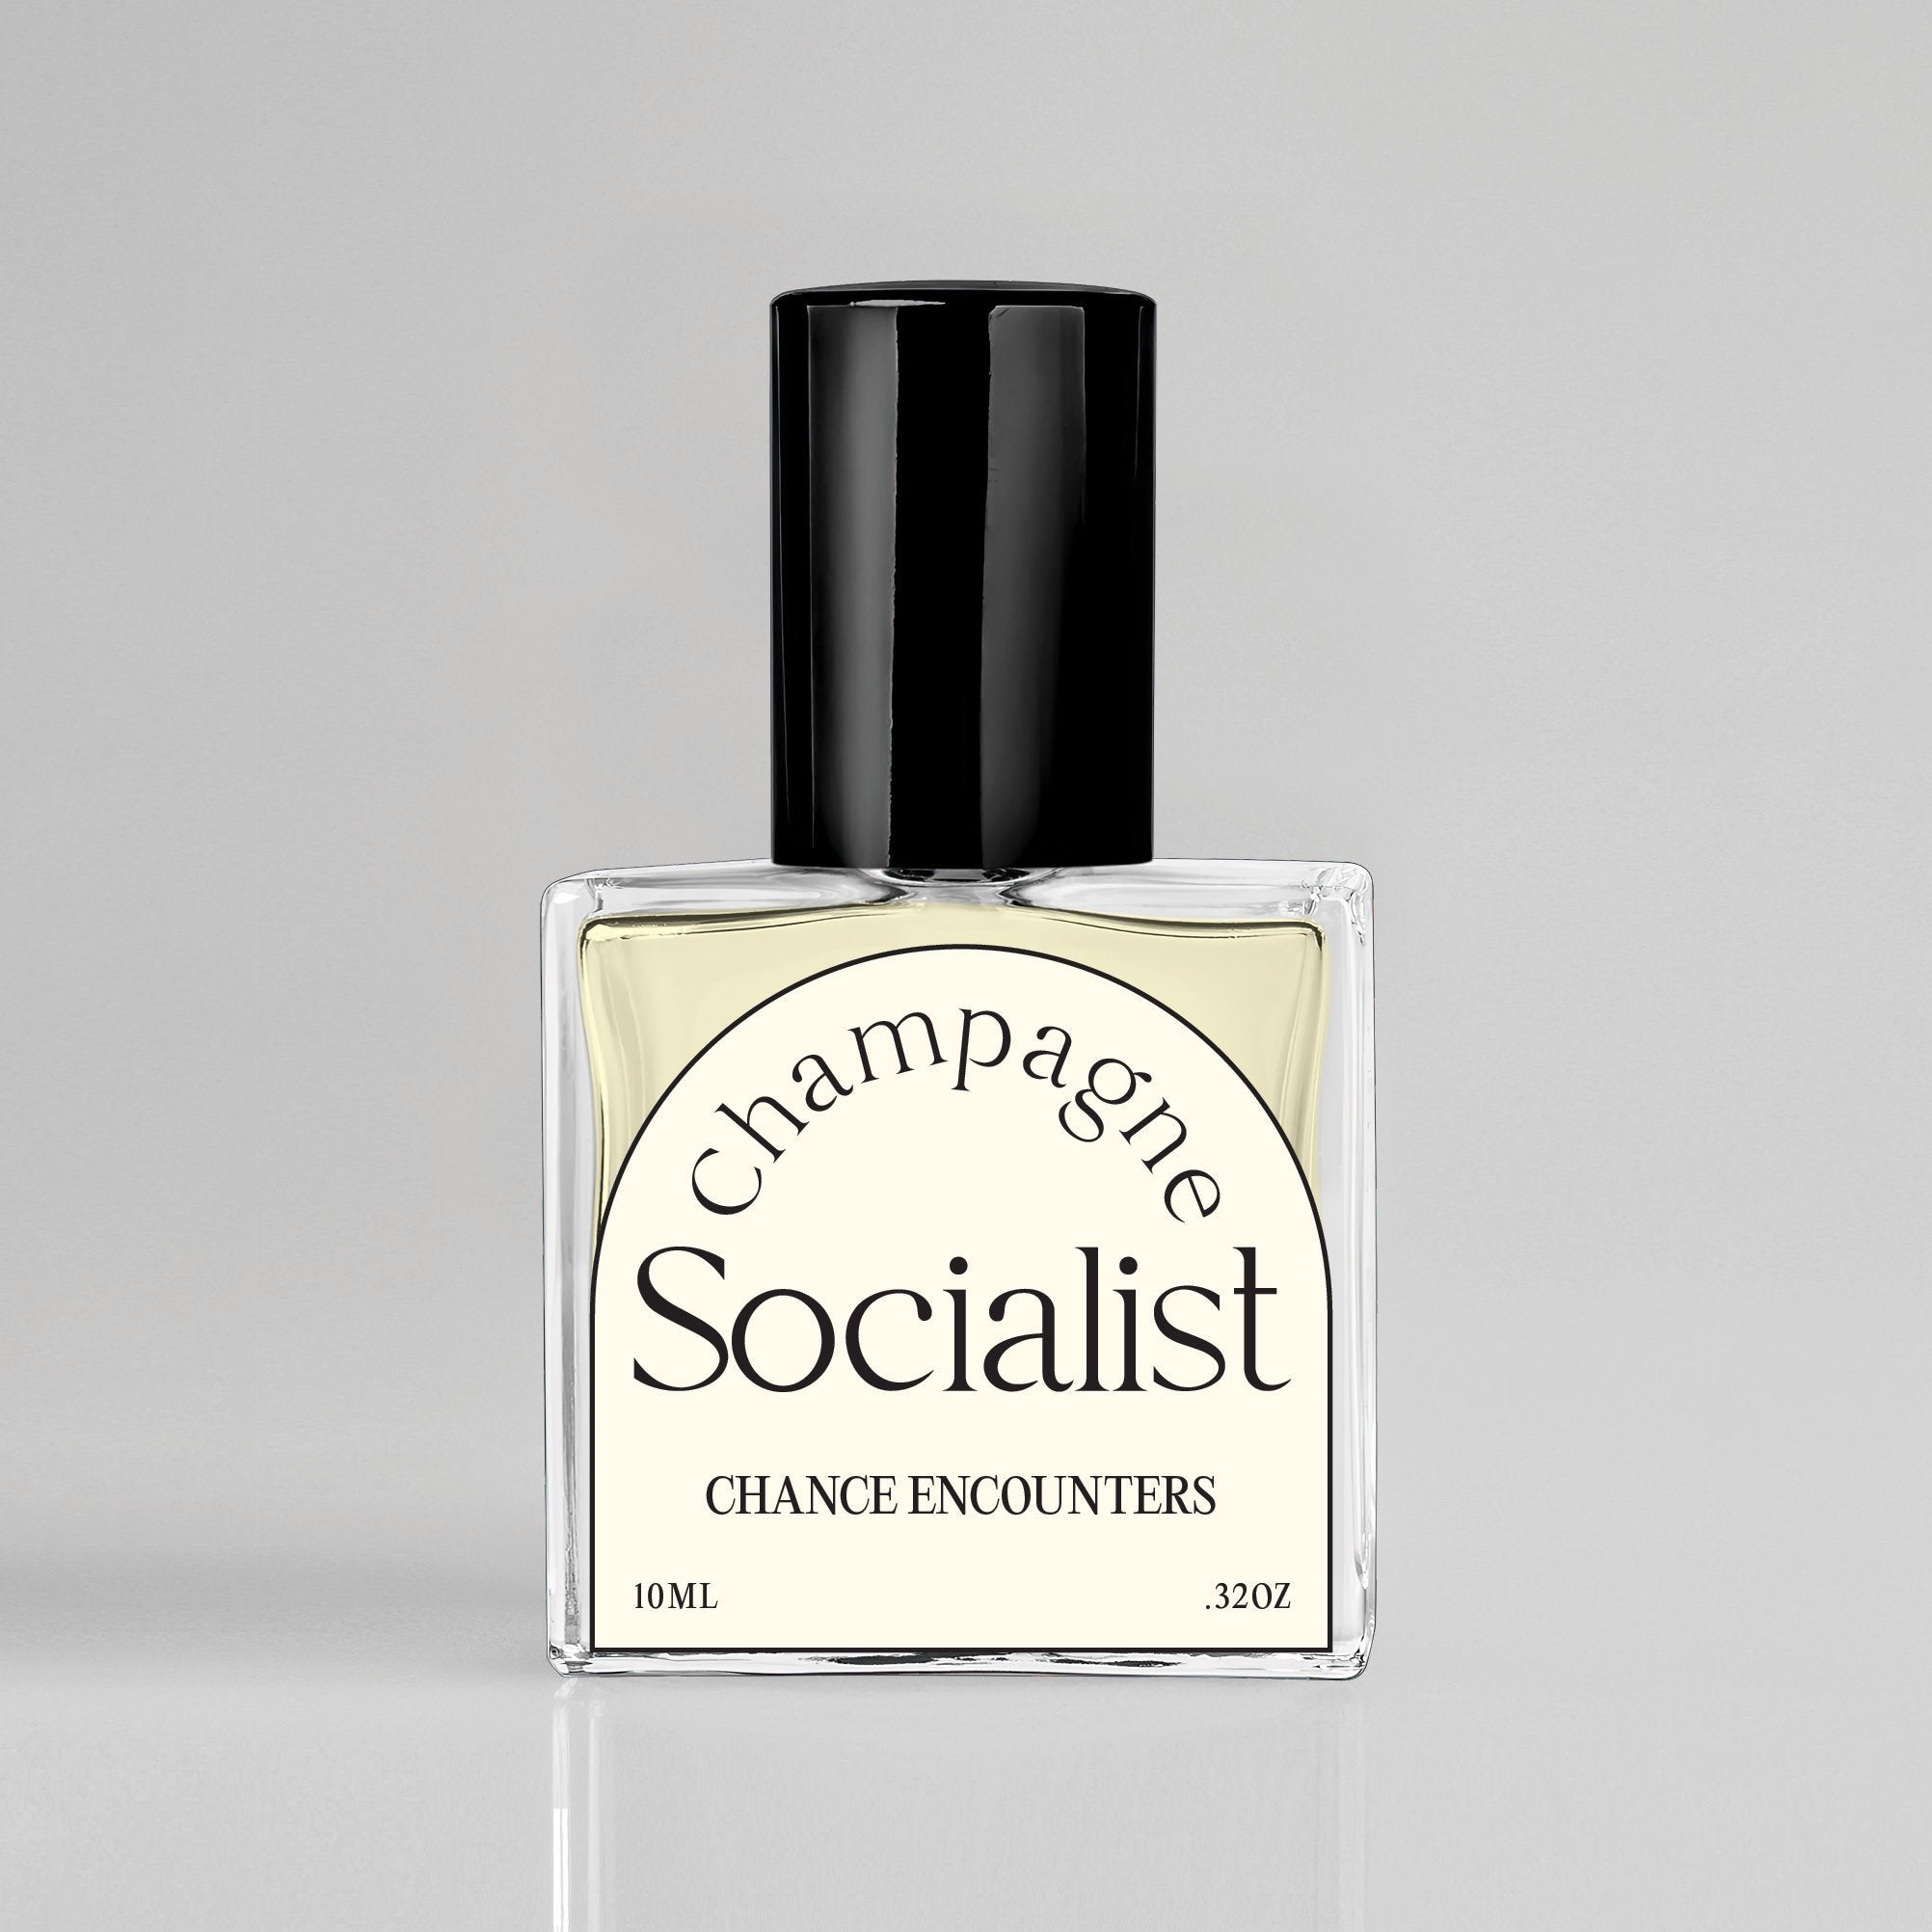 Champagne Socialist Chance Encounters  Oil